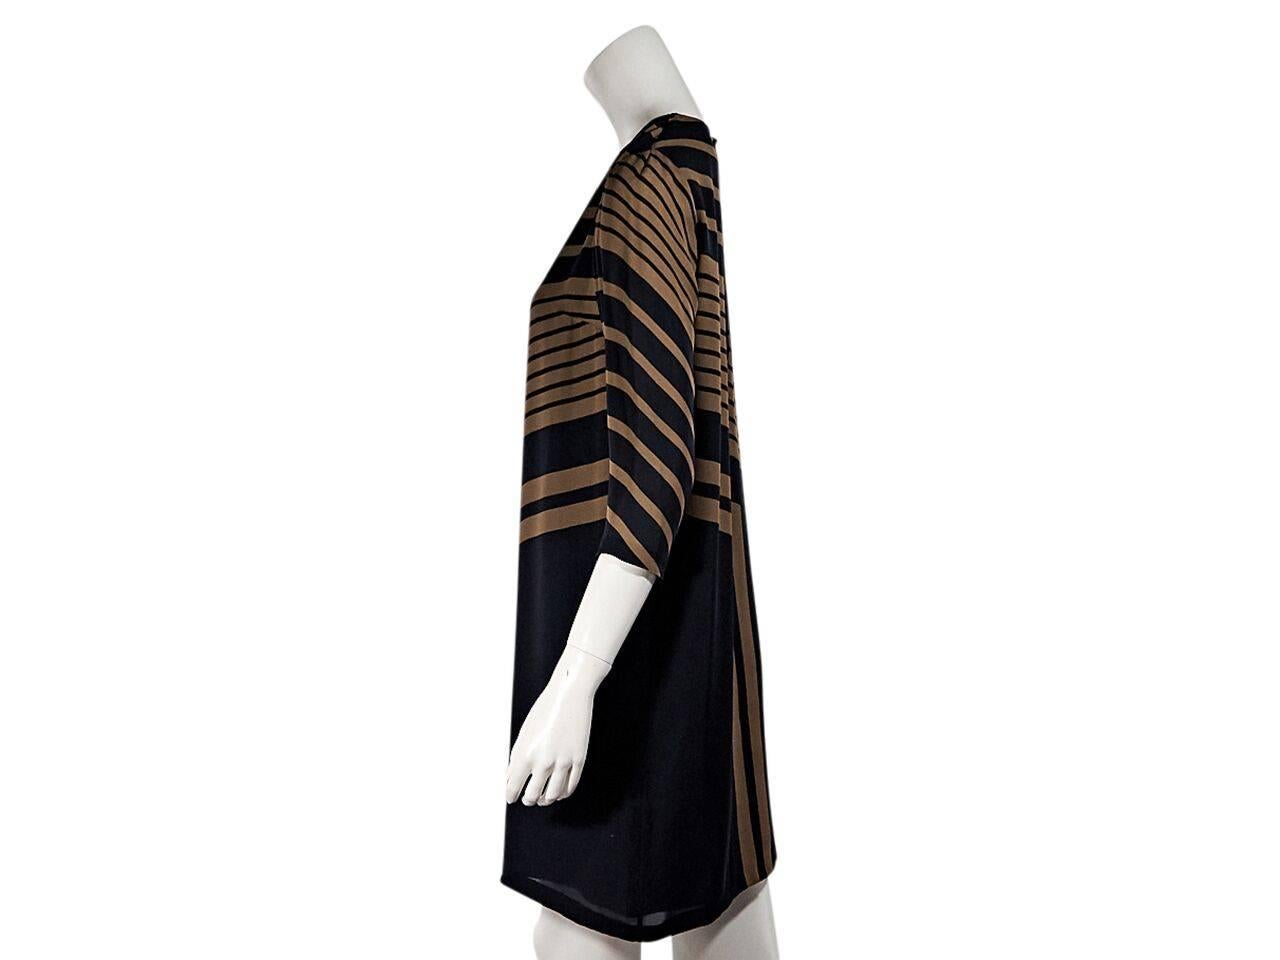 Product details:  Brown and navy blue geometric striped silk shift dress by Stella McCartney.  Roundneck.  Three-quarter length sleeves.  Back button closure with keyhole cutout. 
Condition: Pre-owned. Very good.
Est. Retail $ 698.00